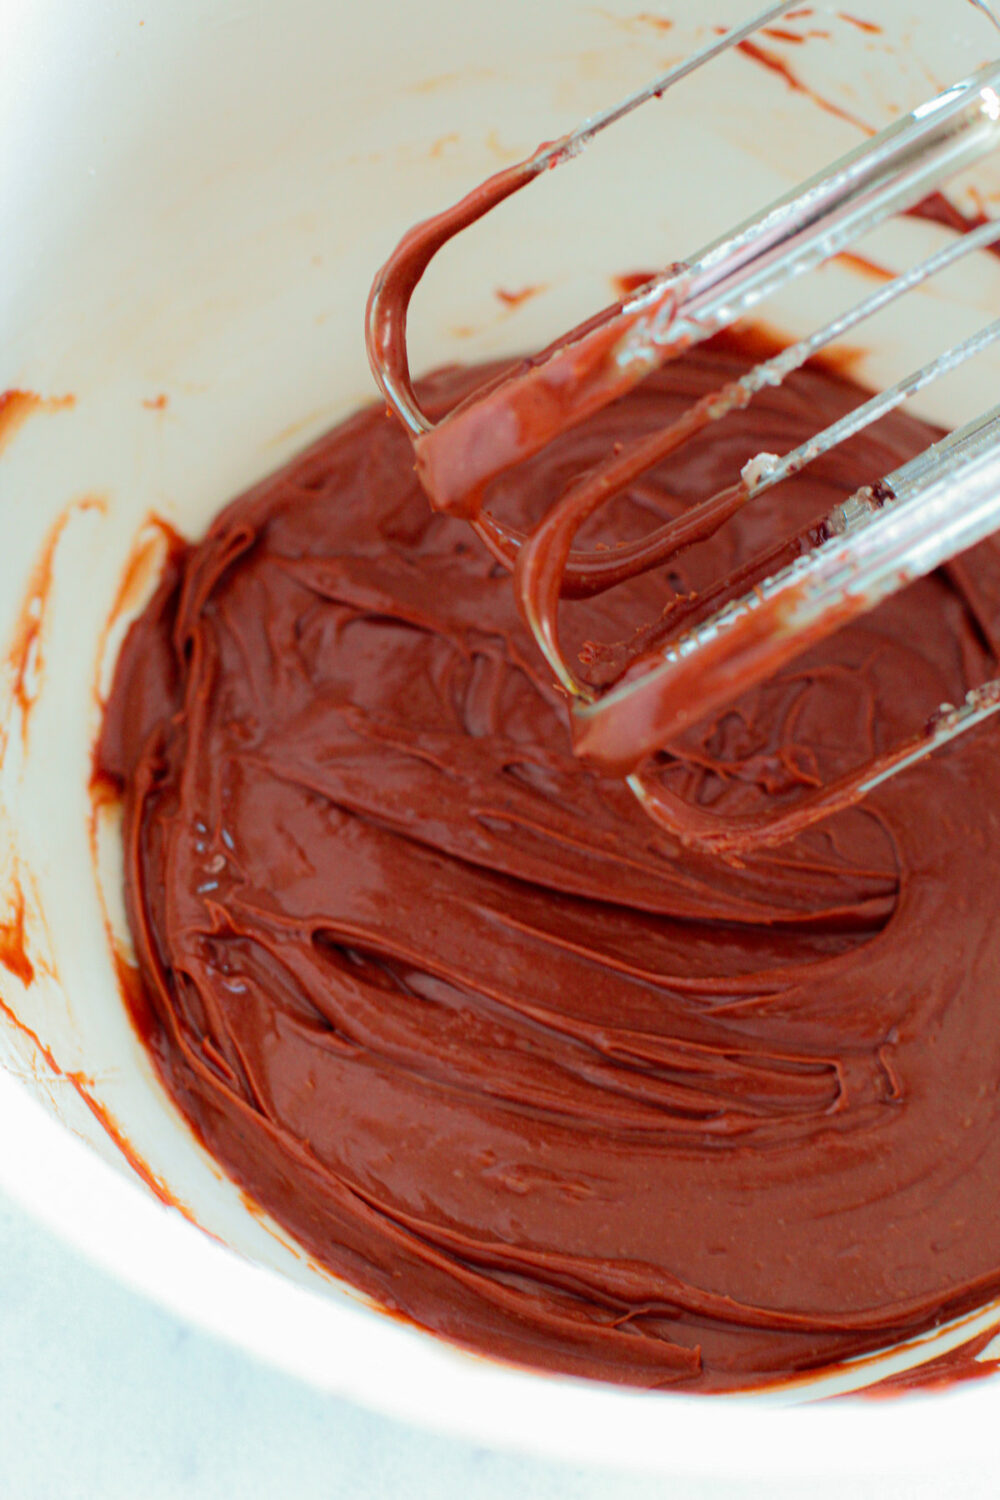 Chocolate frosting. 